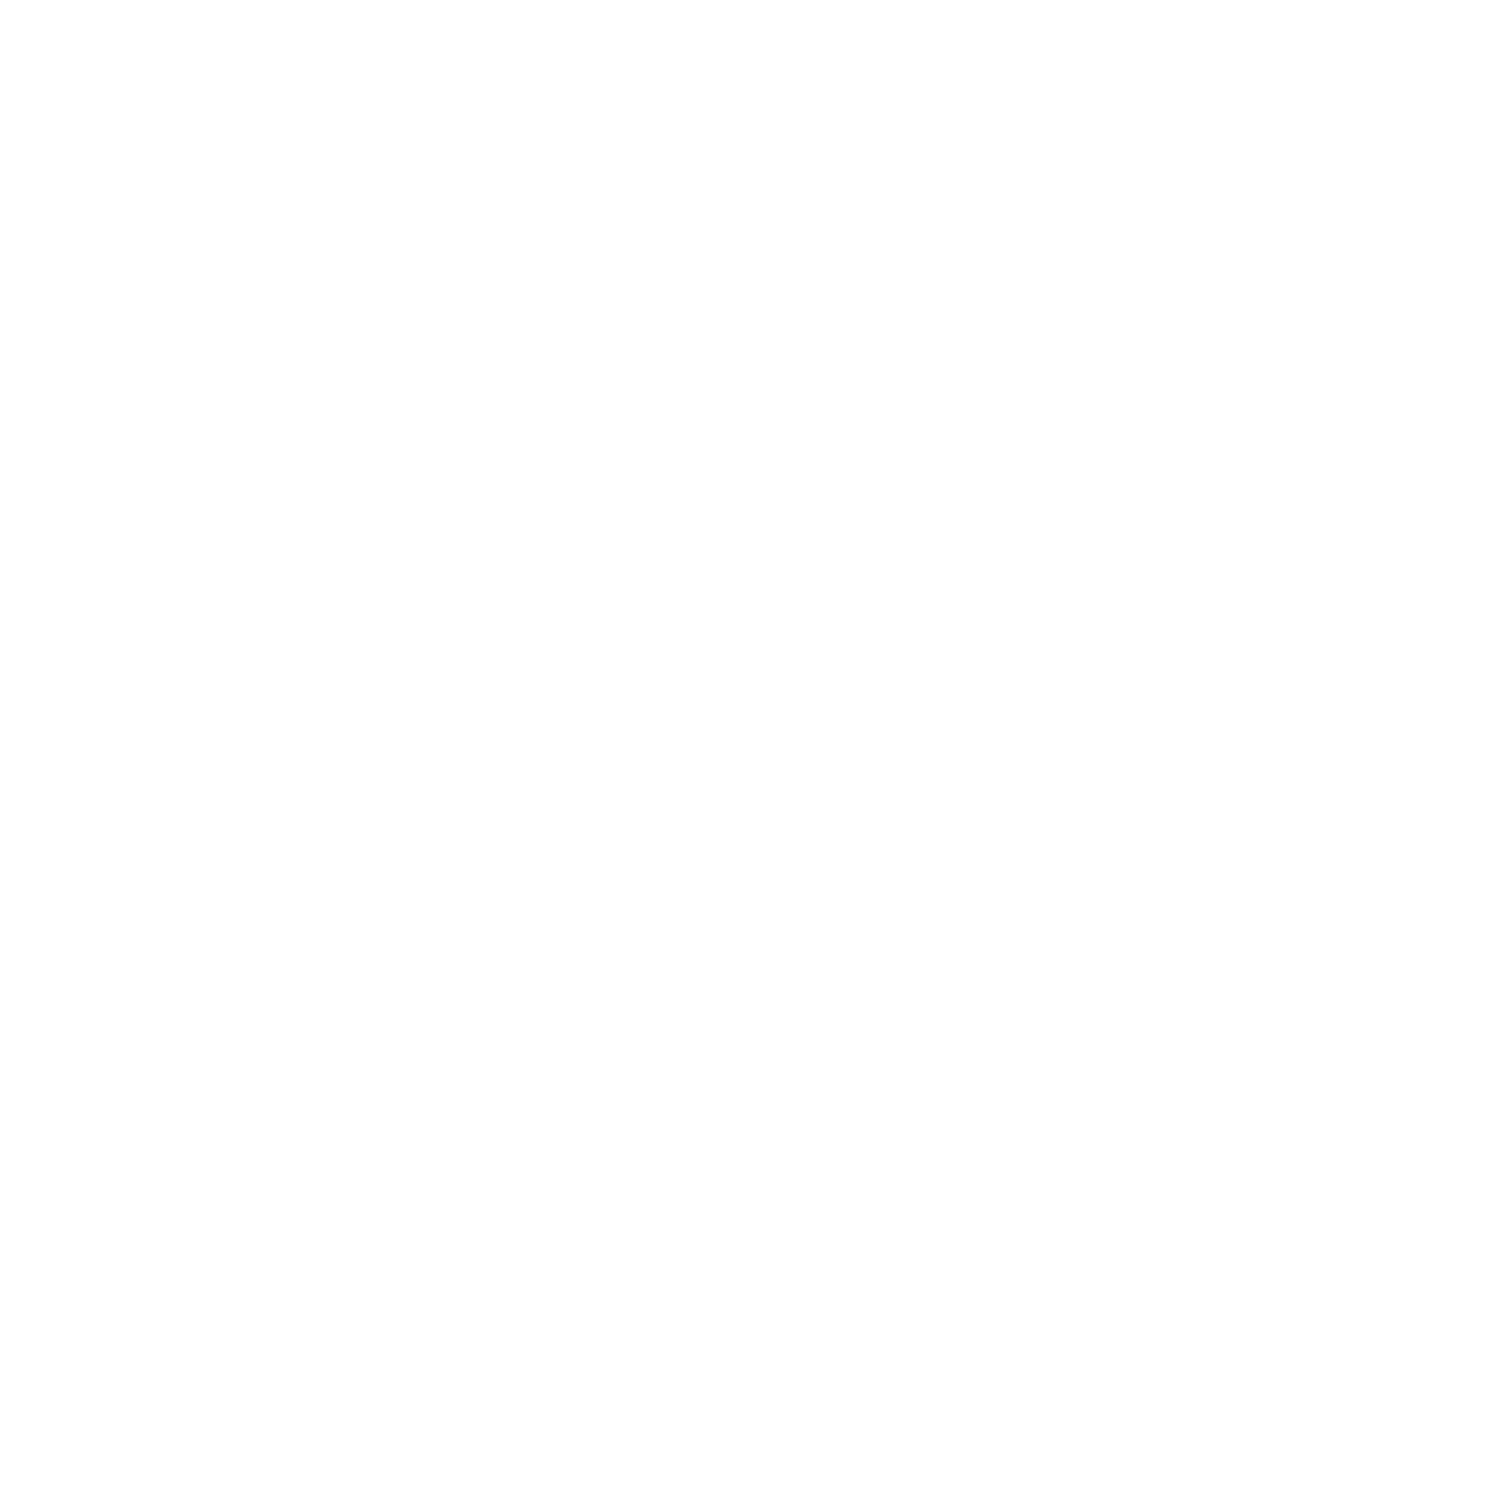 Caan Rose Estates Ltd - Slough : Letting agents in Greenford Greater London Ealing